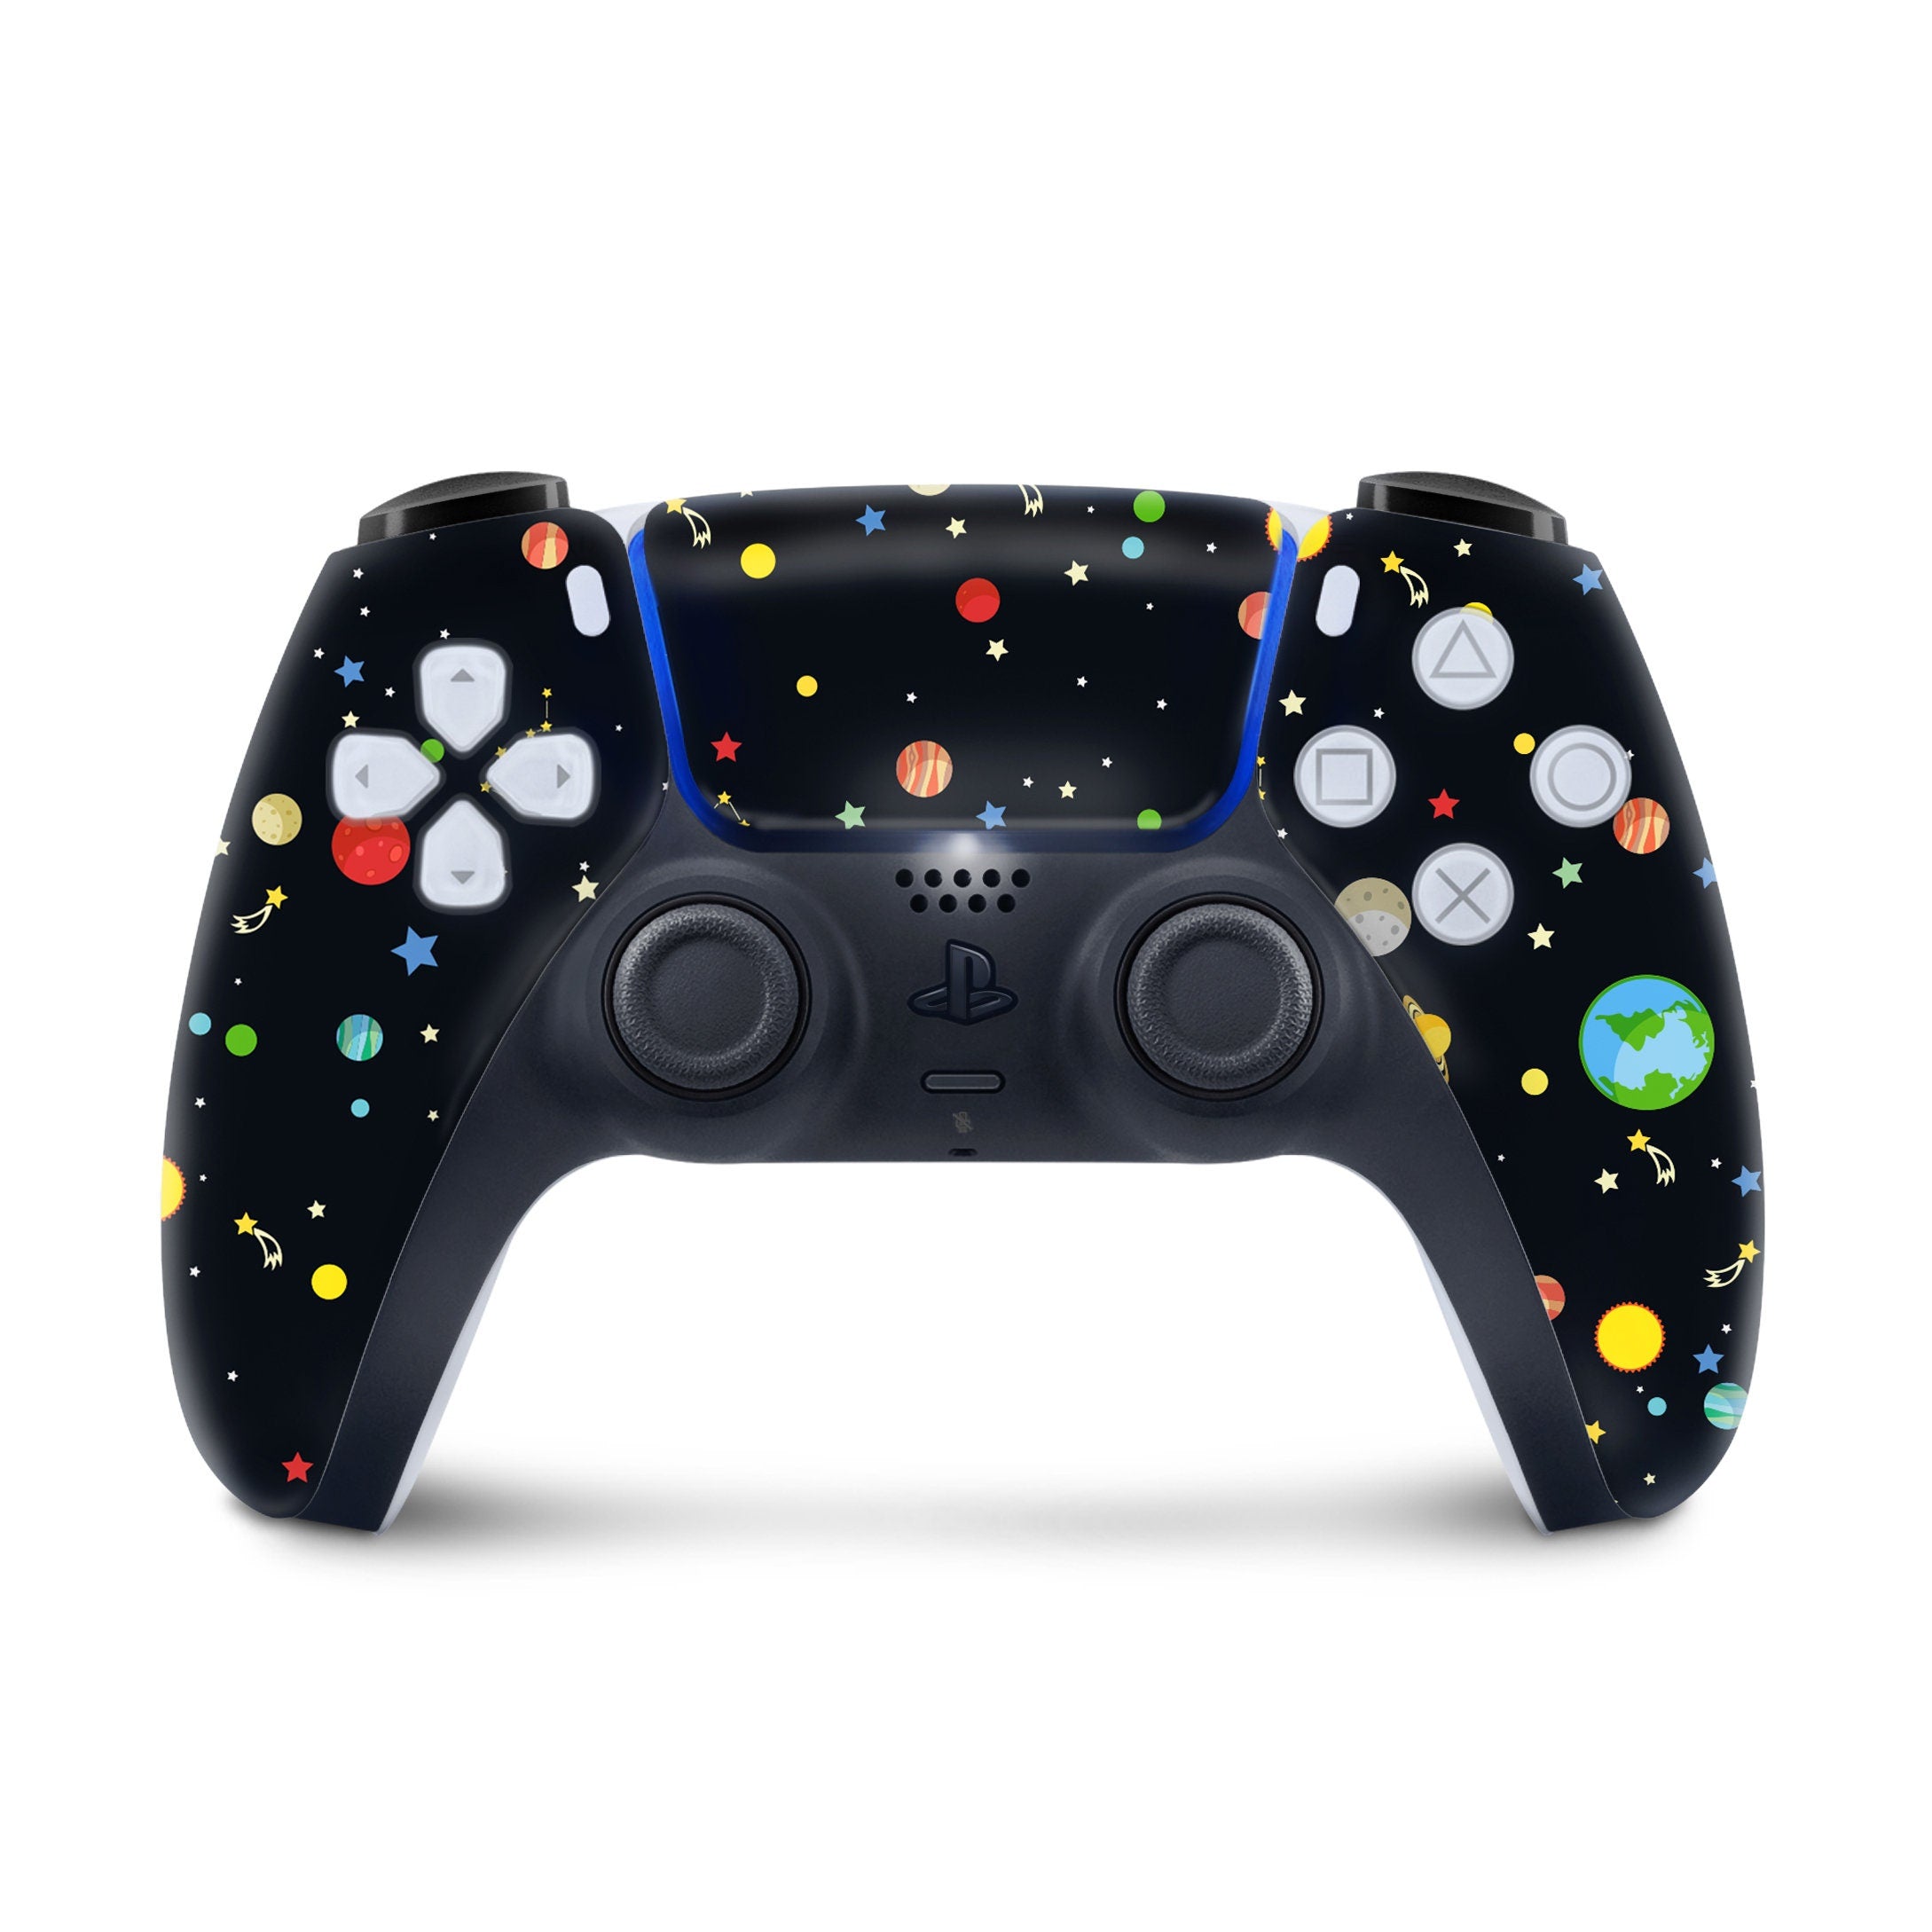 Ps5 skin galaxy, Sony Playstation 5 controller skin Planets, Vinyl 3m stickers Full wrap cover